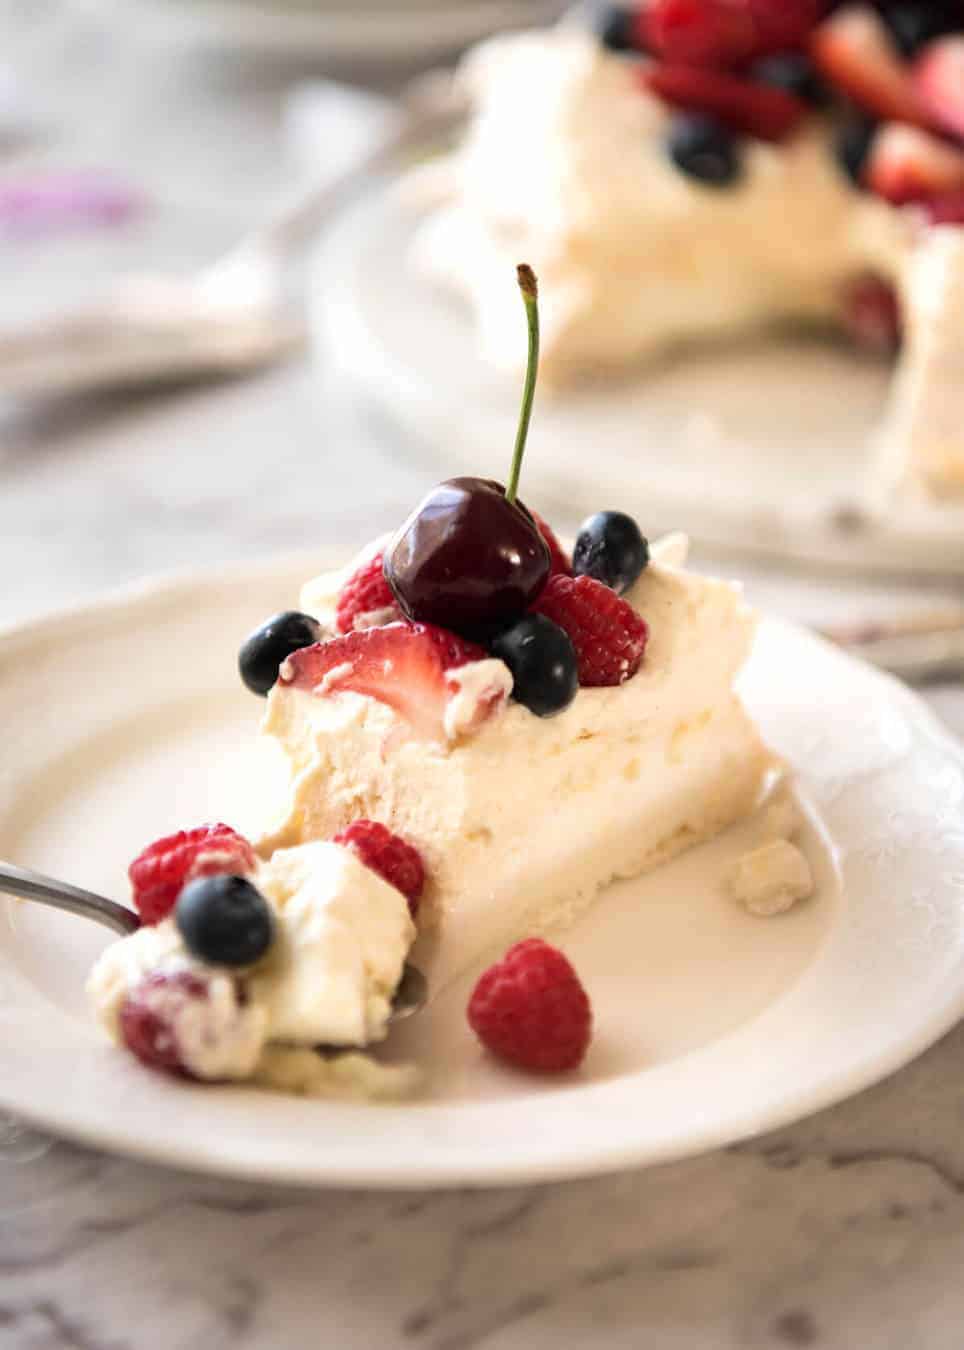 Classic Pavlova recipe with easy to follow tips that make all the difference for a perfect Pav, every time! www.recipetineats.com